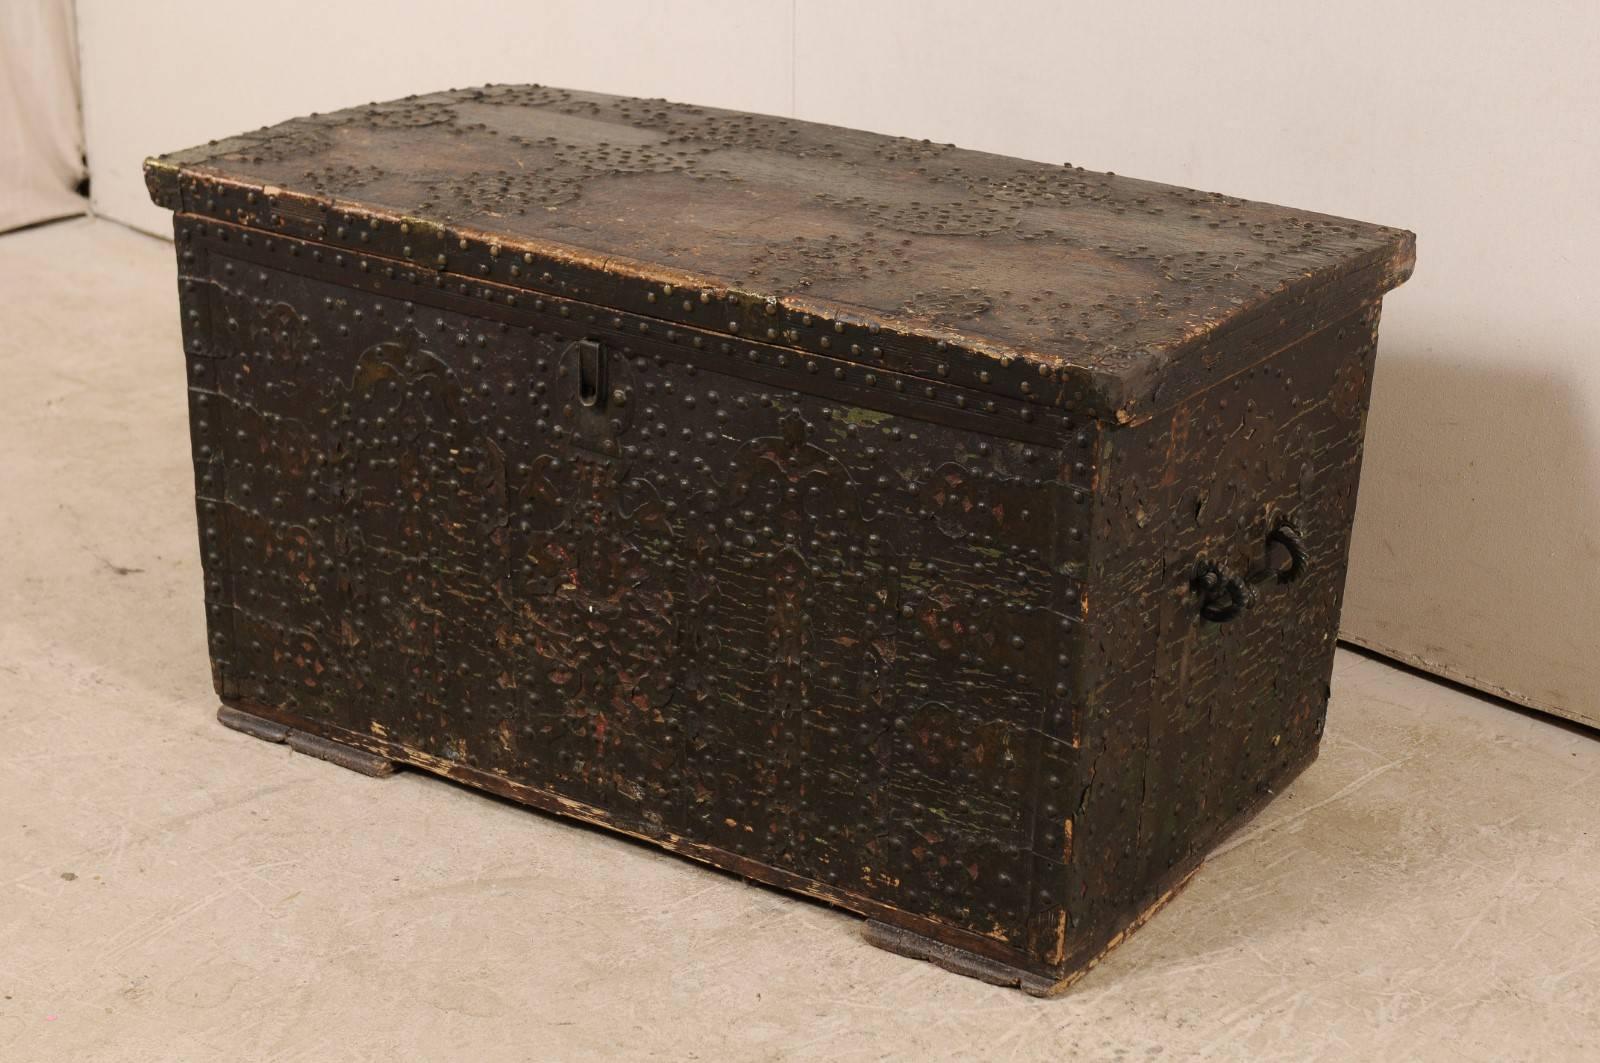 A Spanish Baroque studded coffer from the turn of the 18th and 19th centuries. This antique Spanish coffer, with it's rectangular-shaped body, has been ornately decorated with nailhead brass studs (which have a dark patina from age) along the entire